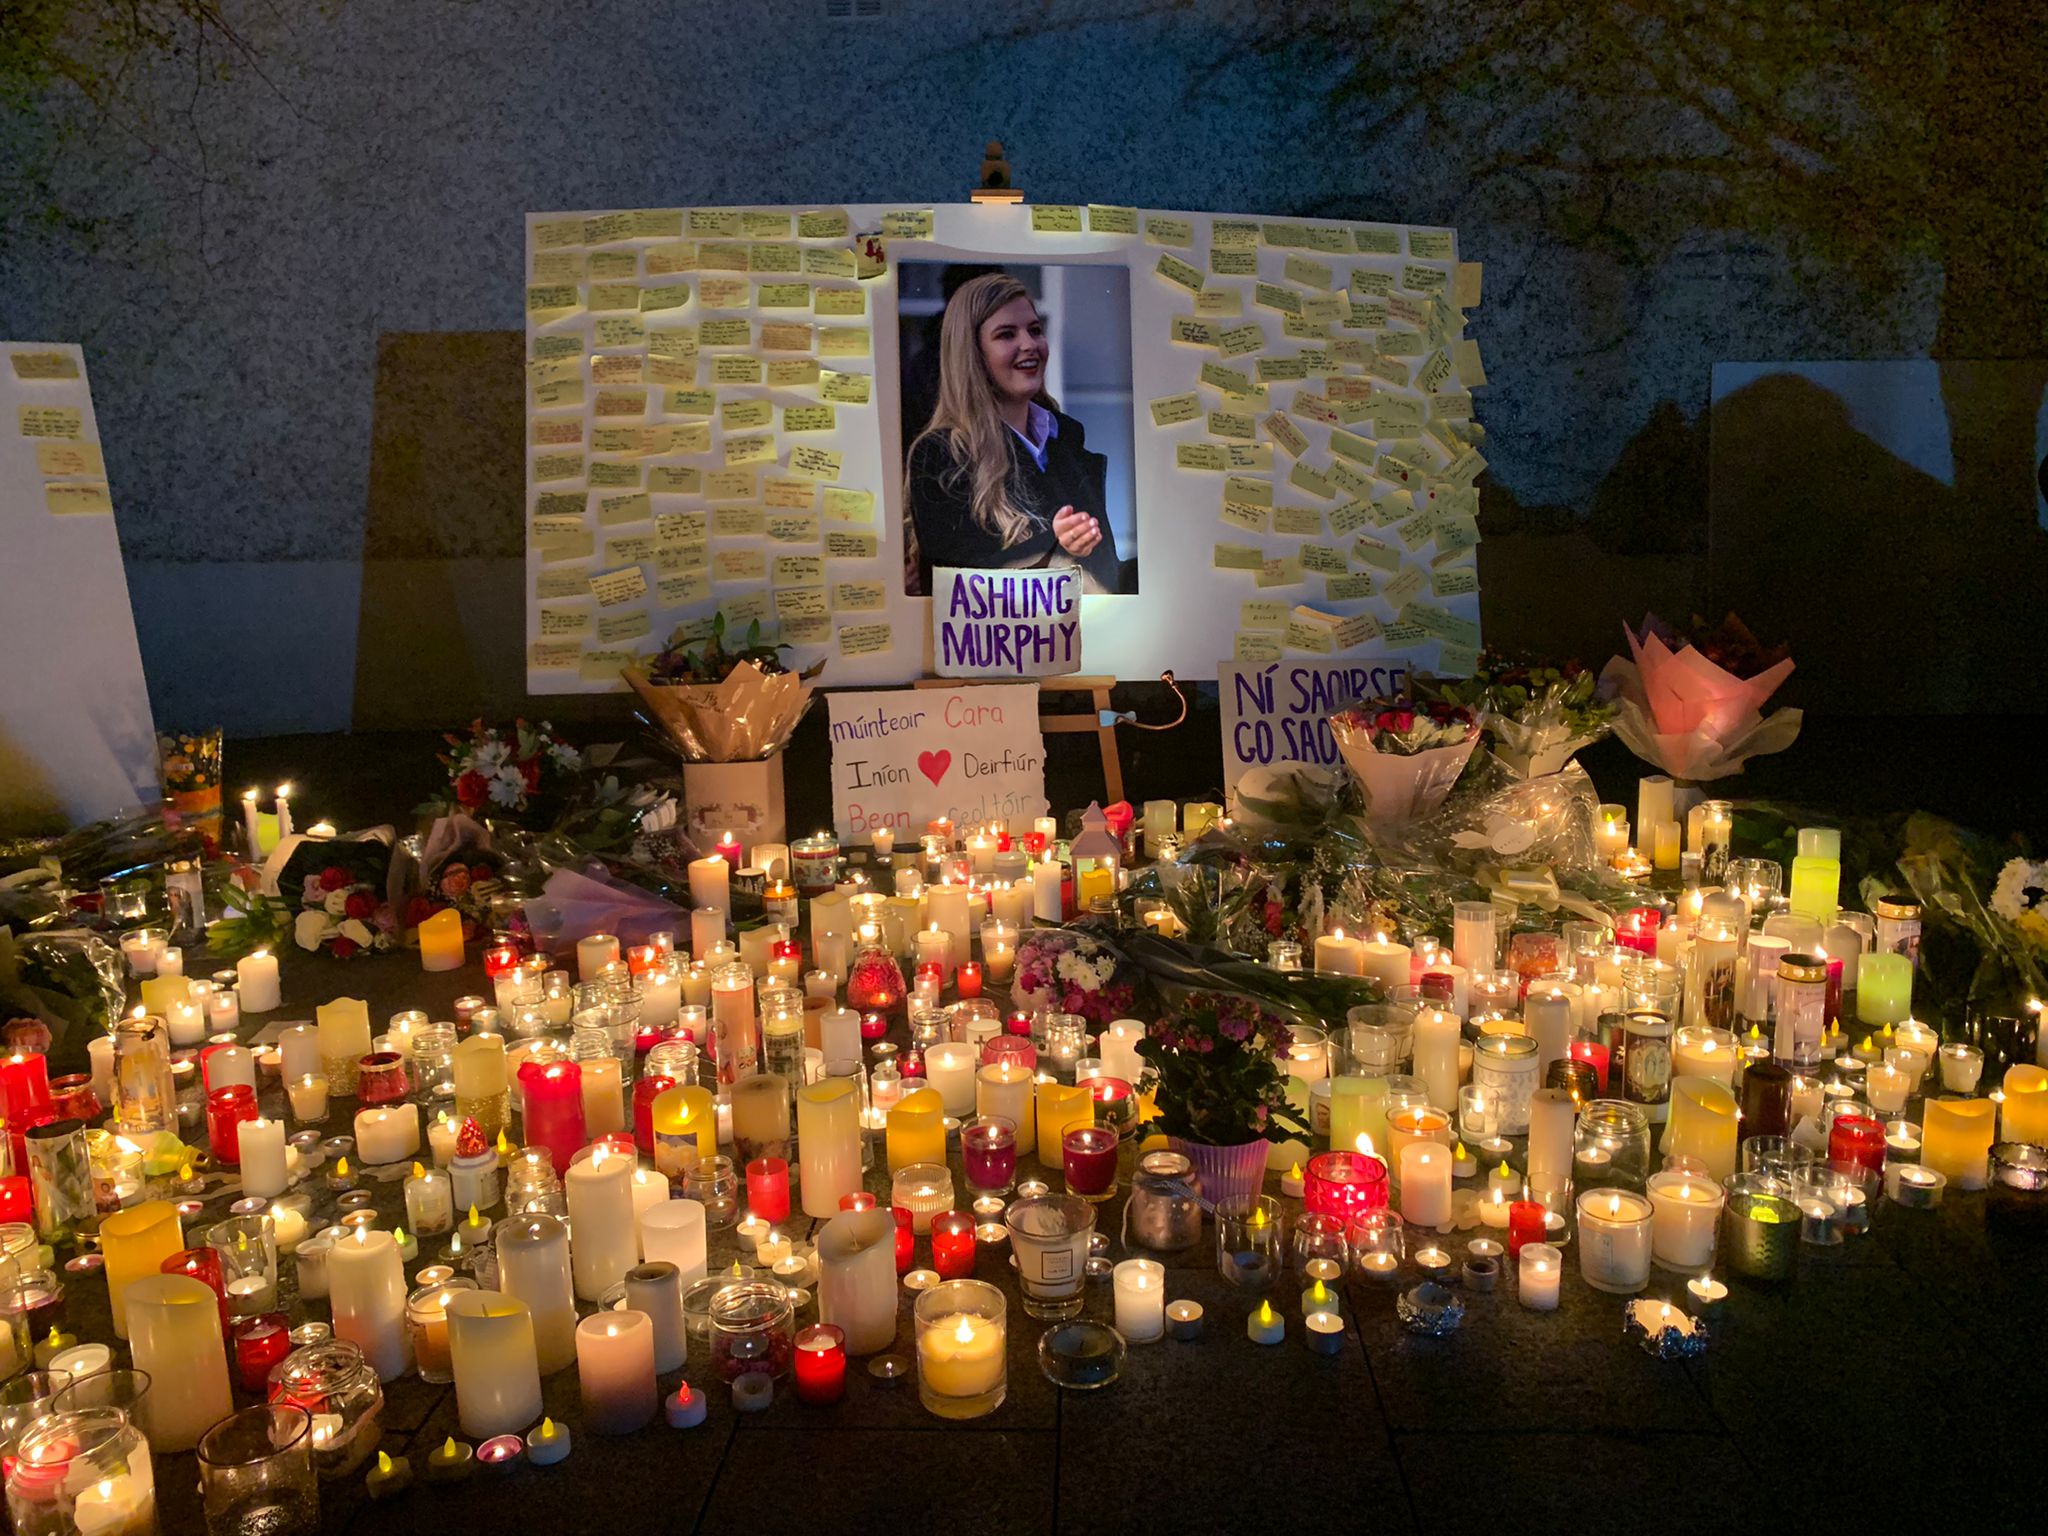 A photo of Ashling Murphy is surrounded by messages and flanked by candles and flowers in Tullamore, Co Offaly.